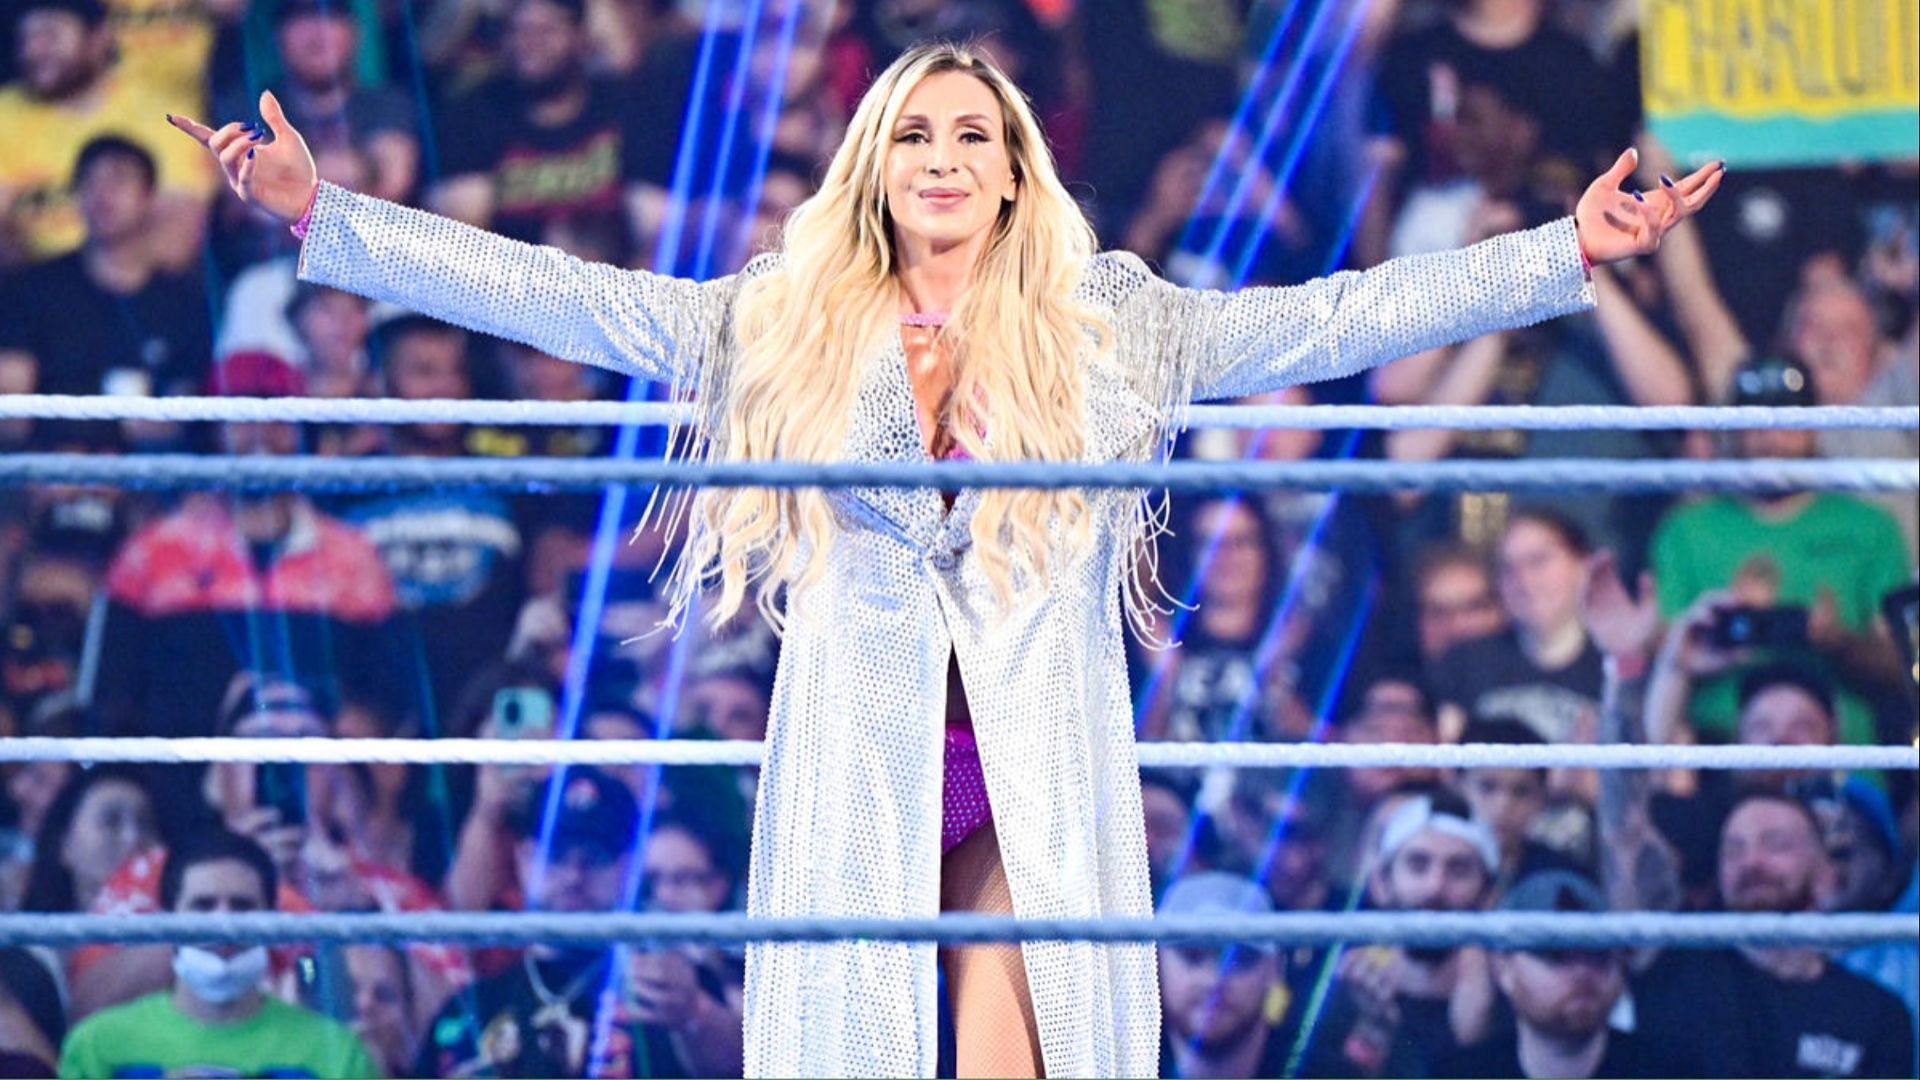 Charlotte Flair poses in the ring on WWE SmackDown.